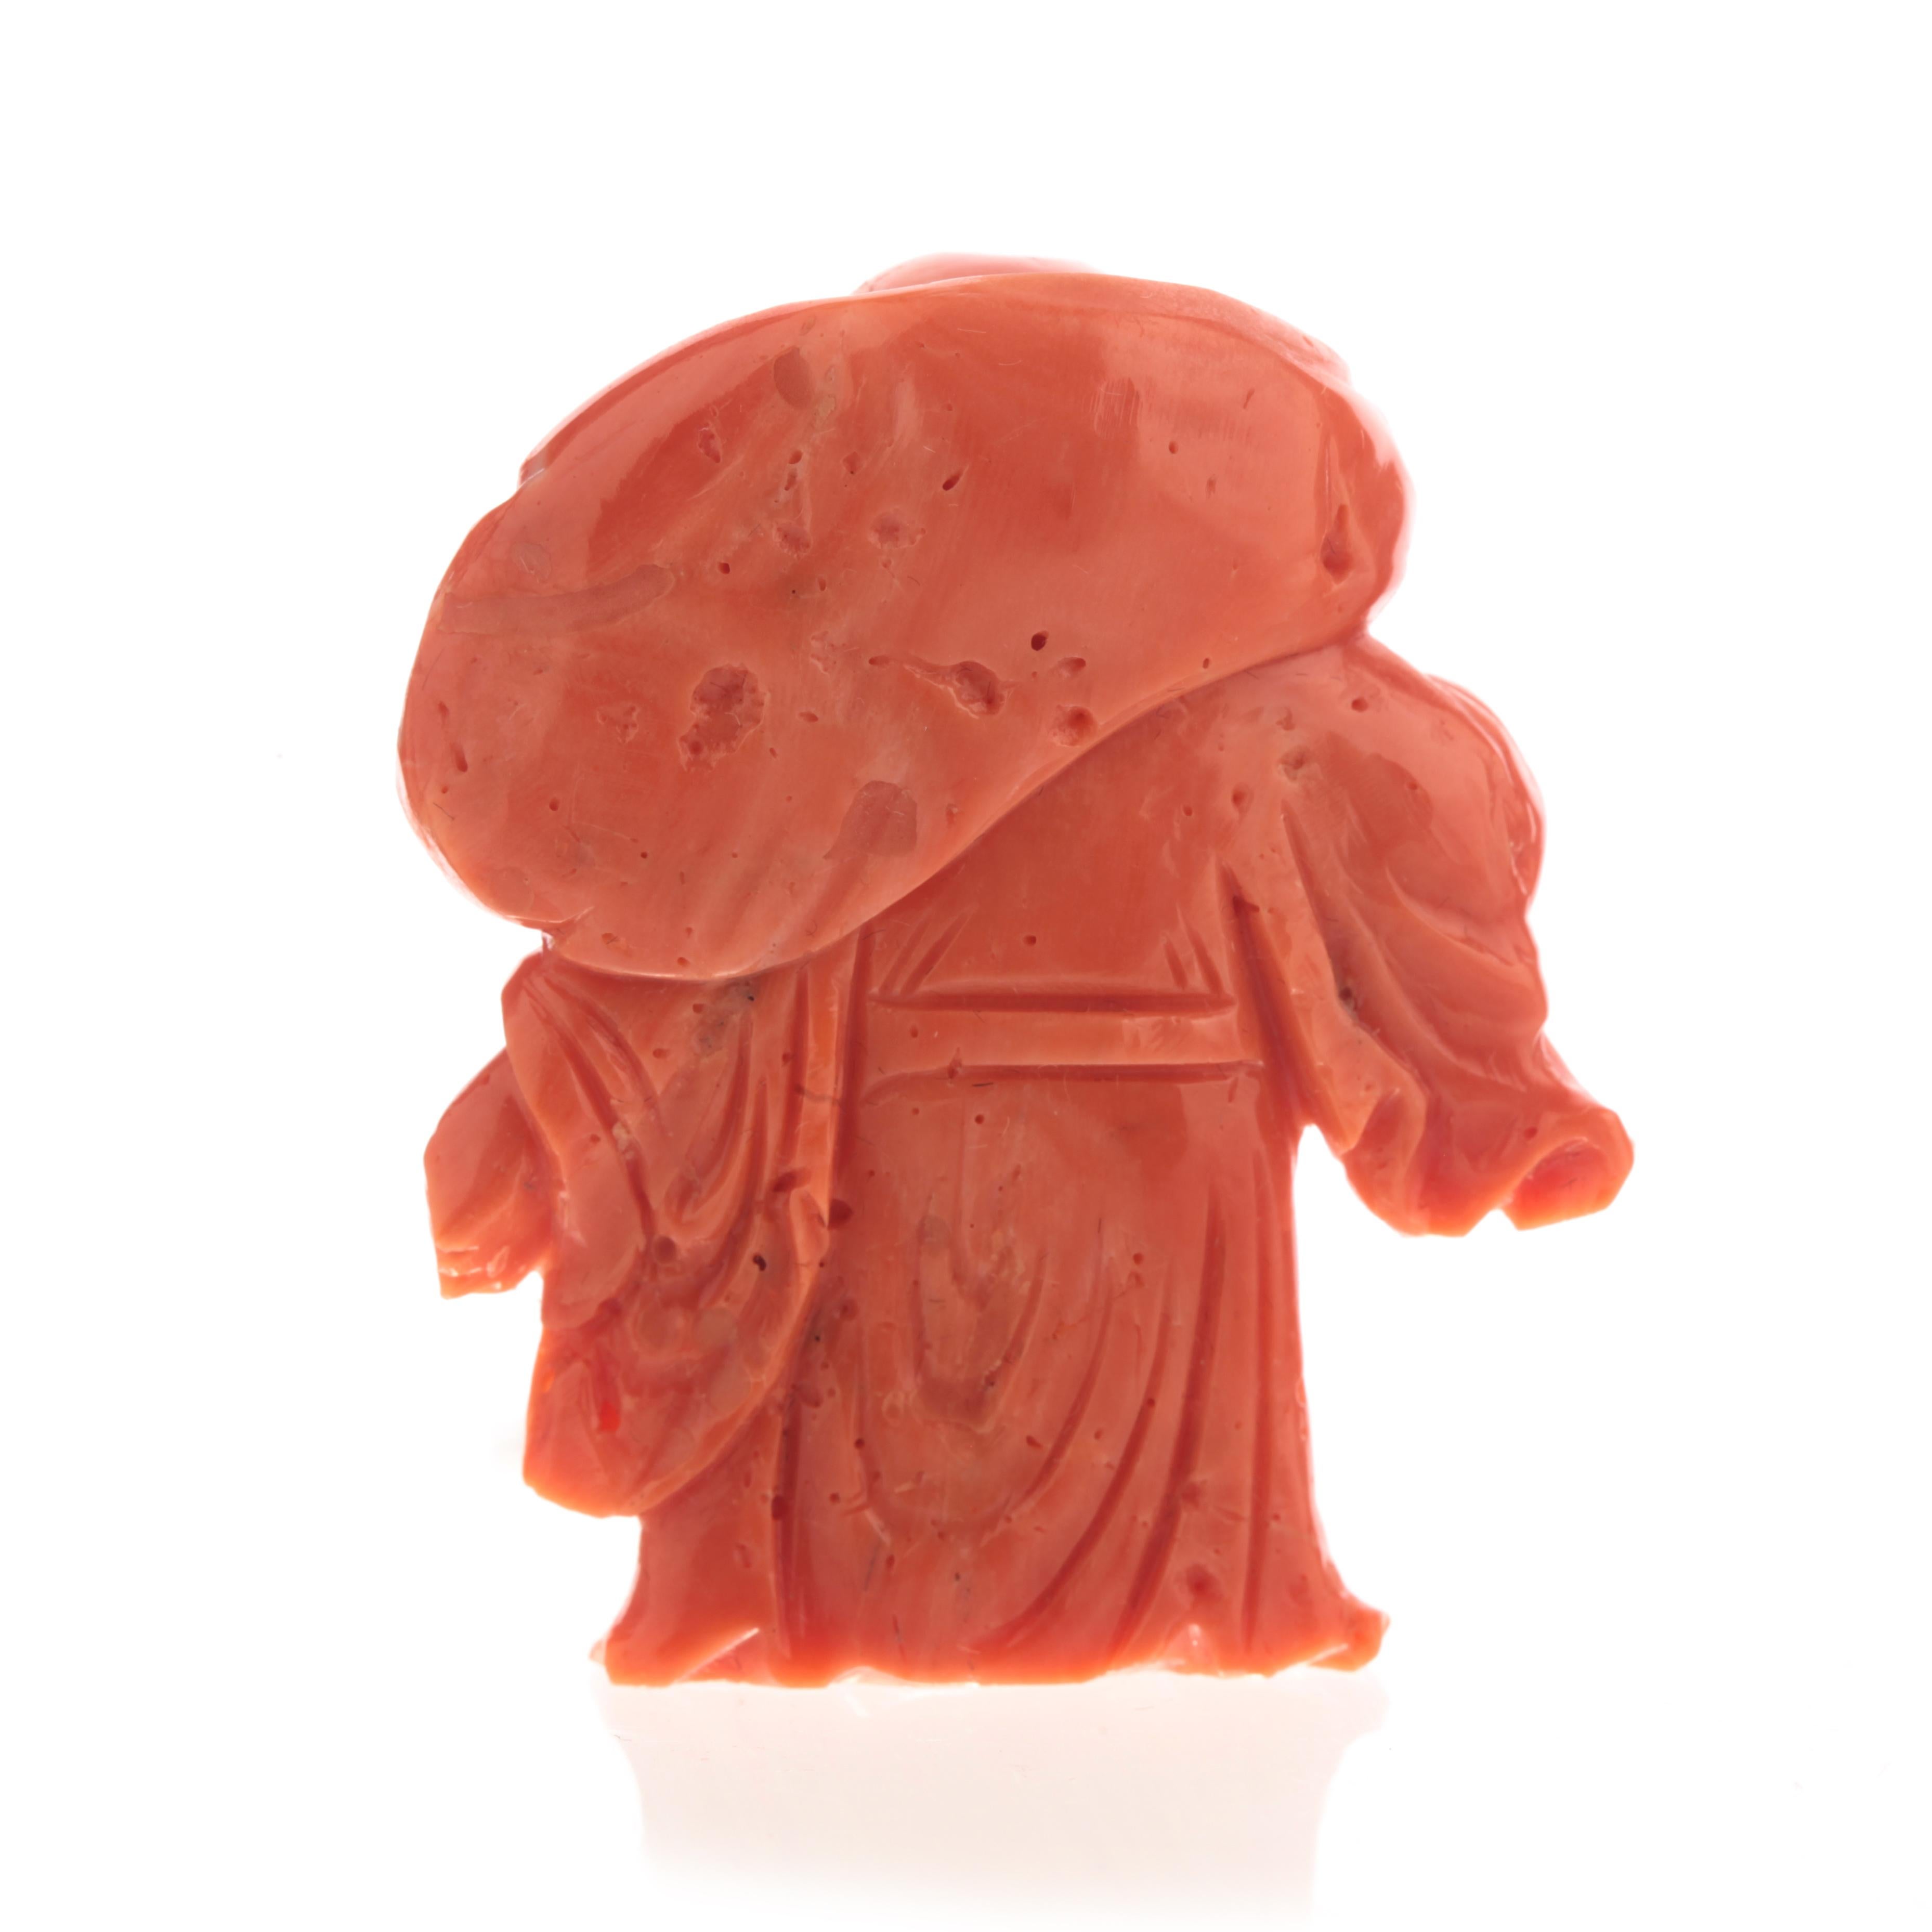 Chinese Laughing Buddha Carved Asian Decorative Art Statue Sculpture Natural Red Coral For Sale